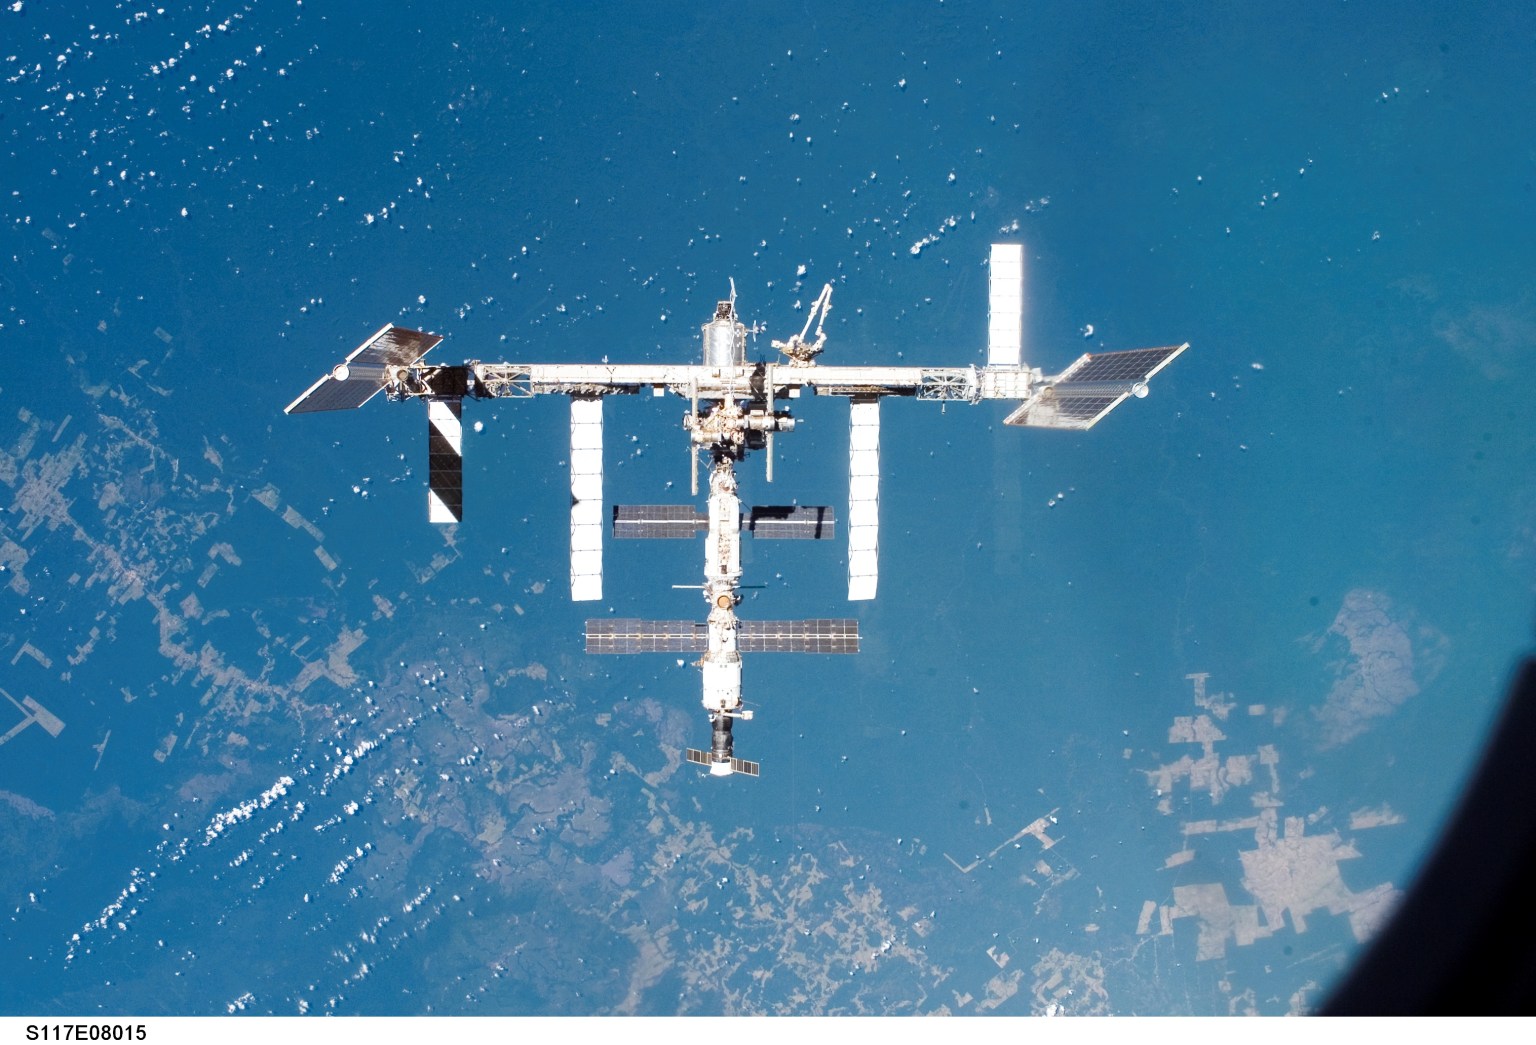 The S3/S4 (Starboard) truss segment adds to the expanding International Space Station's integrated truss segment in this photograph from space shuttle Atlantis after it undocked on June 19, 2007.